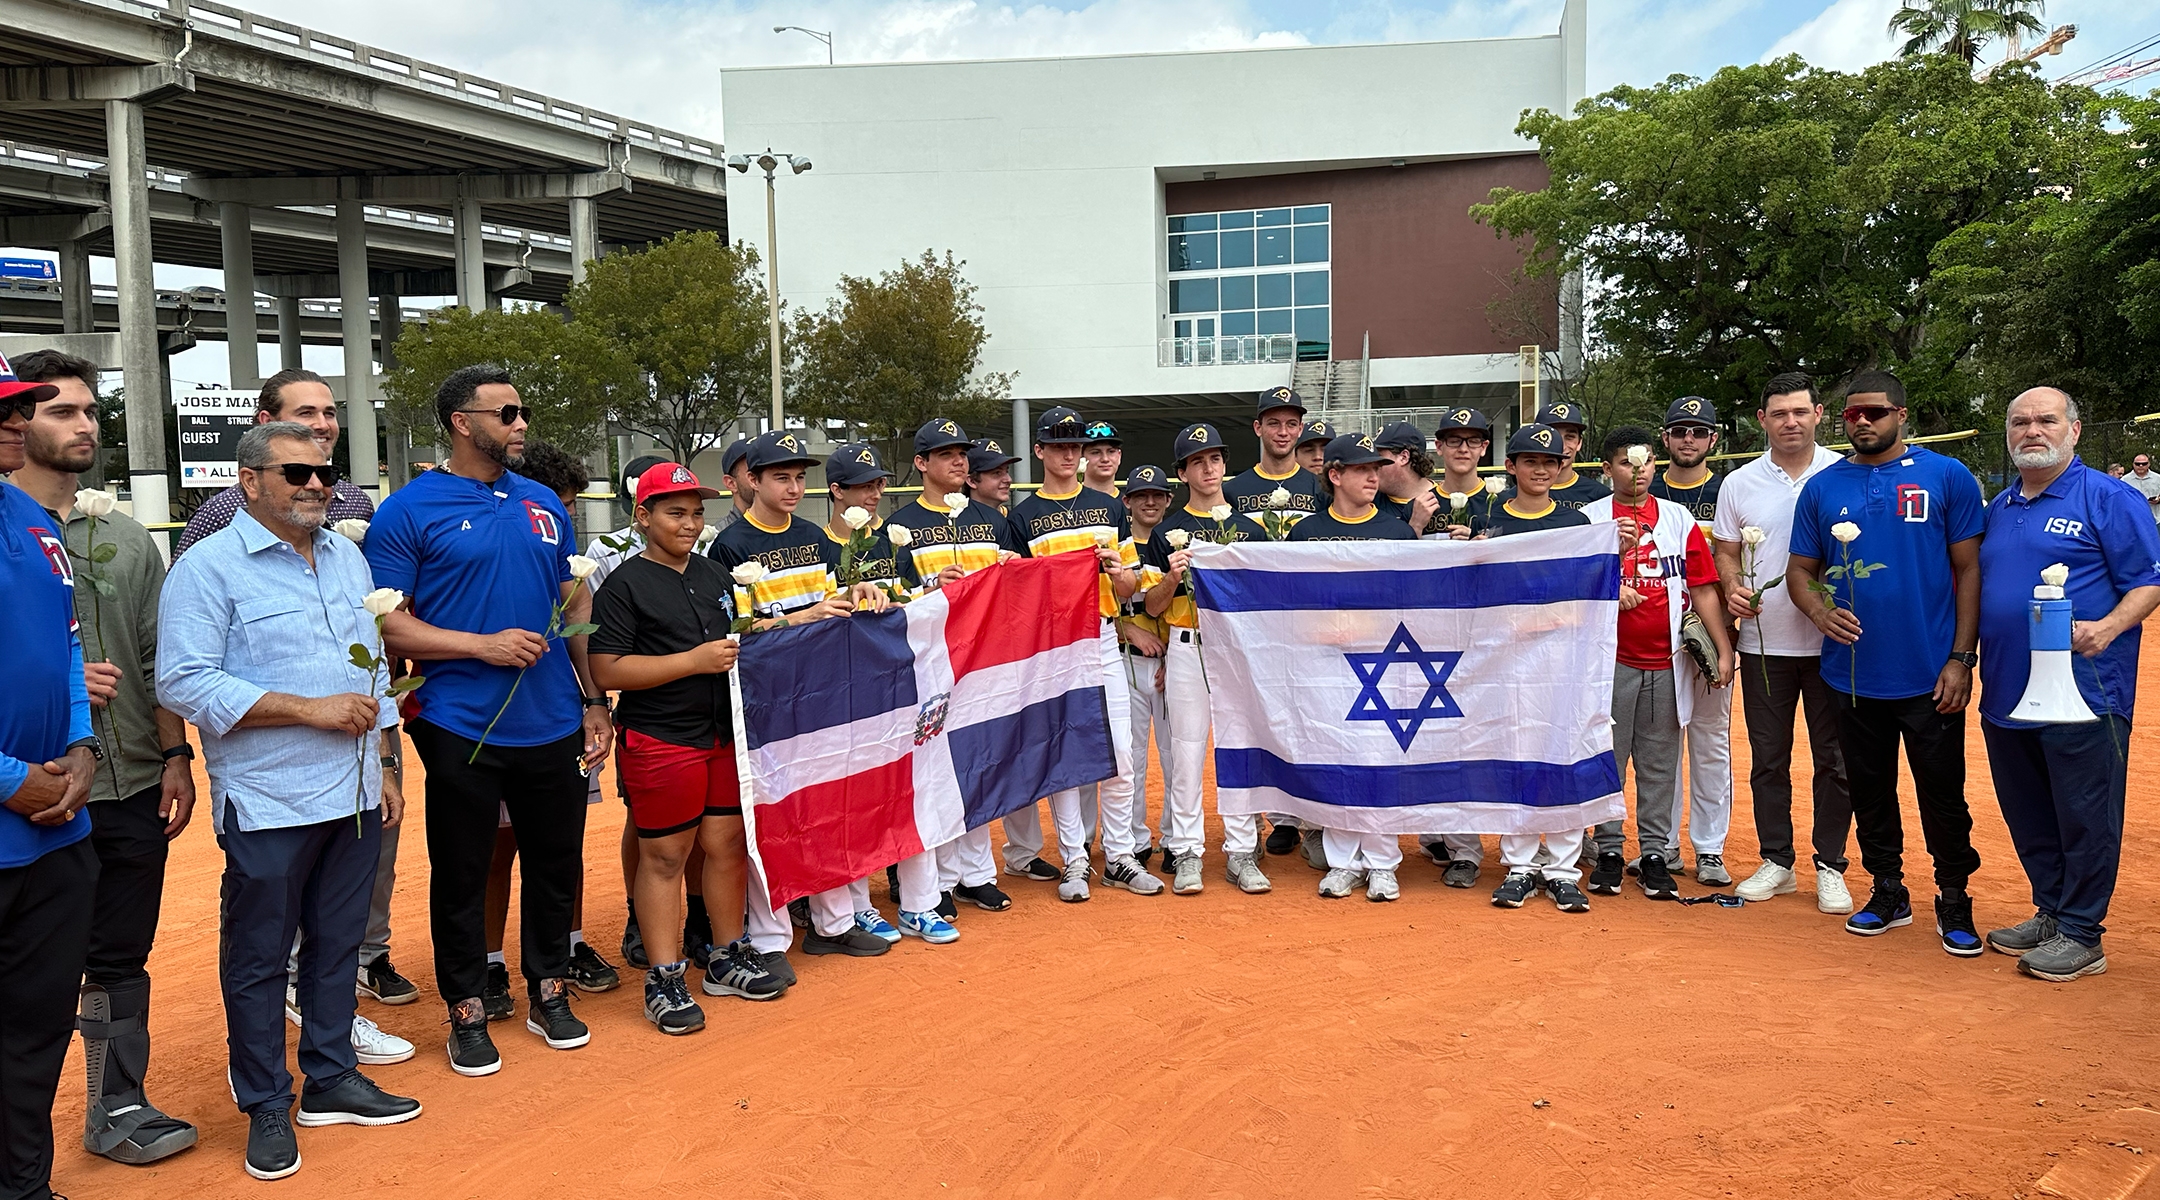 Baseball players from the David Posnack Jewish Day School pose with local Dominican teens at an Israel-Dominican Republic friendship ceremony held at the World Baseball Classic in Miami, March 14, 2023.(Jacob Gurvis)